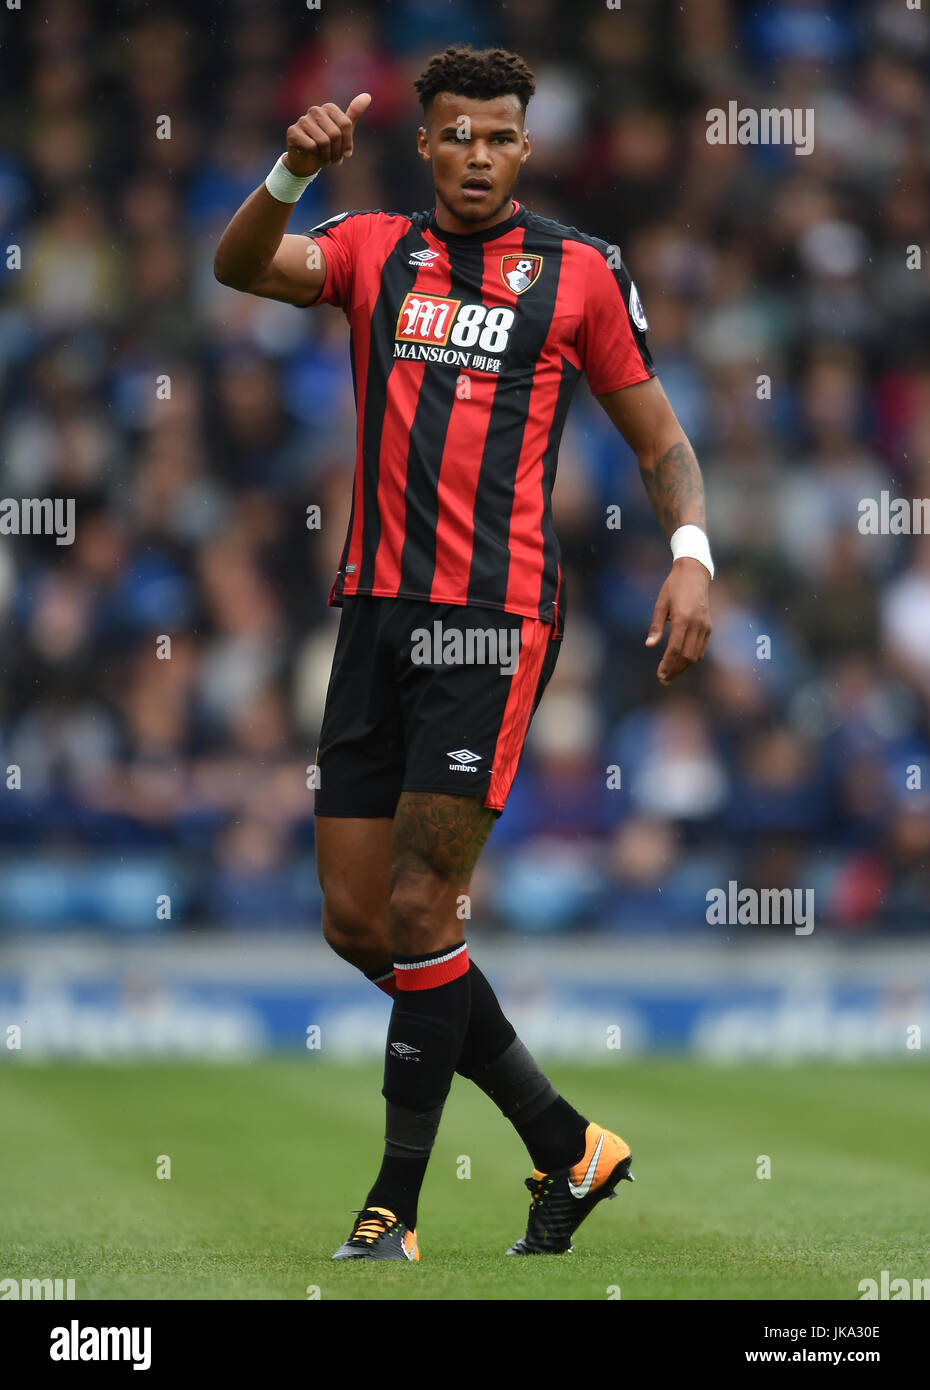 AFC Bournemouth's Tyrone Mings during the pre-season friendly match at Fratton Park, Portsmouth. PRESS ASSOCIATION Photo. Picture date: Saturday July 22, 2017. See PA story SOCCER Portsmouth. Photo credit should read: Daniel Hambury/PA Wire. RESTRICTIONS: No use with unauthorised audio, video, data, fixture lists, club/league logos or 'live' services. Online in-match use limited to 75 images, no video emulation. No use in betting, games or single club/league/player publications. Stock Photo